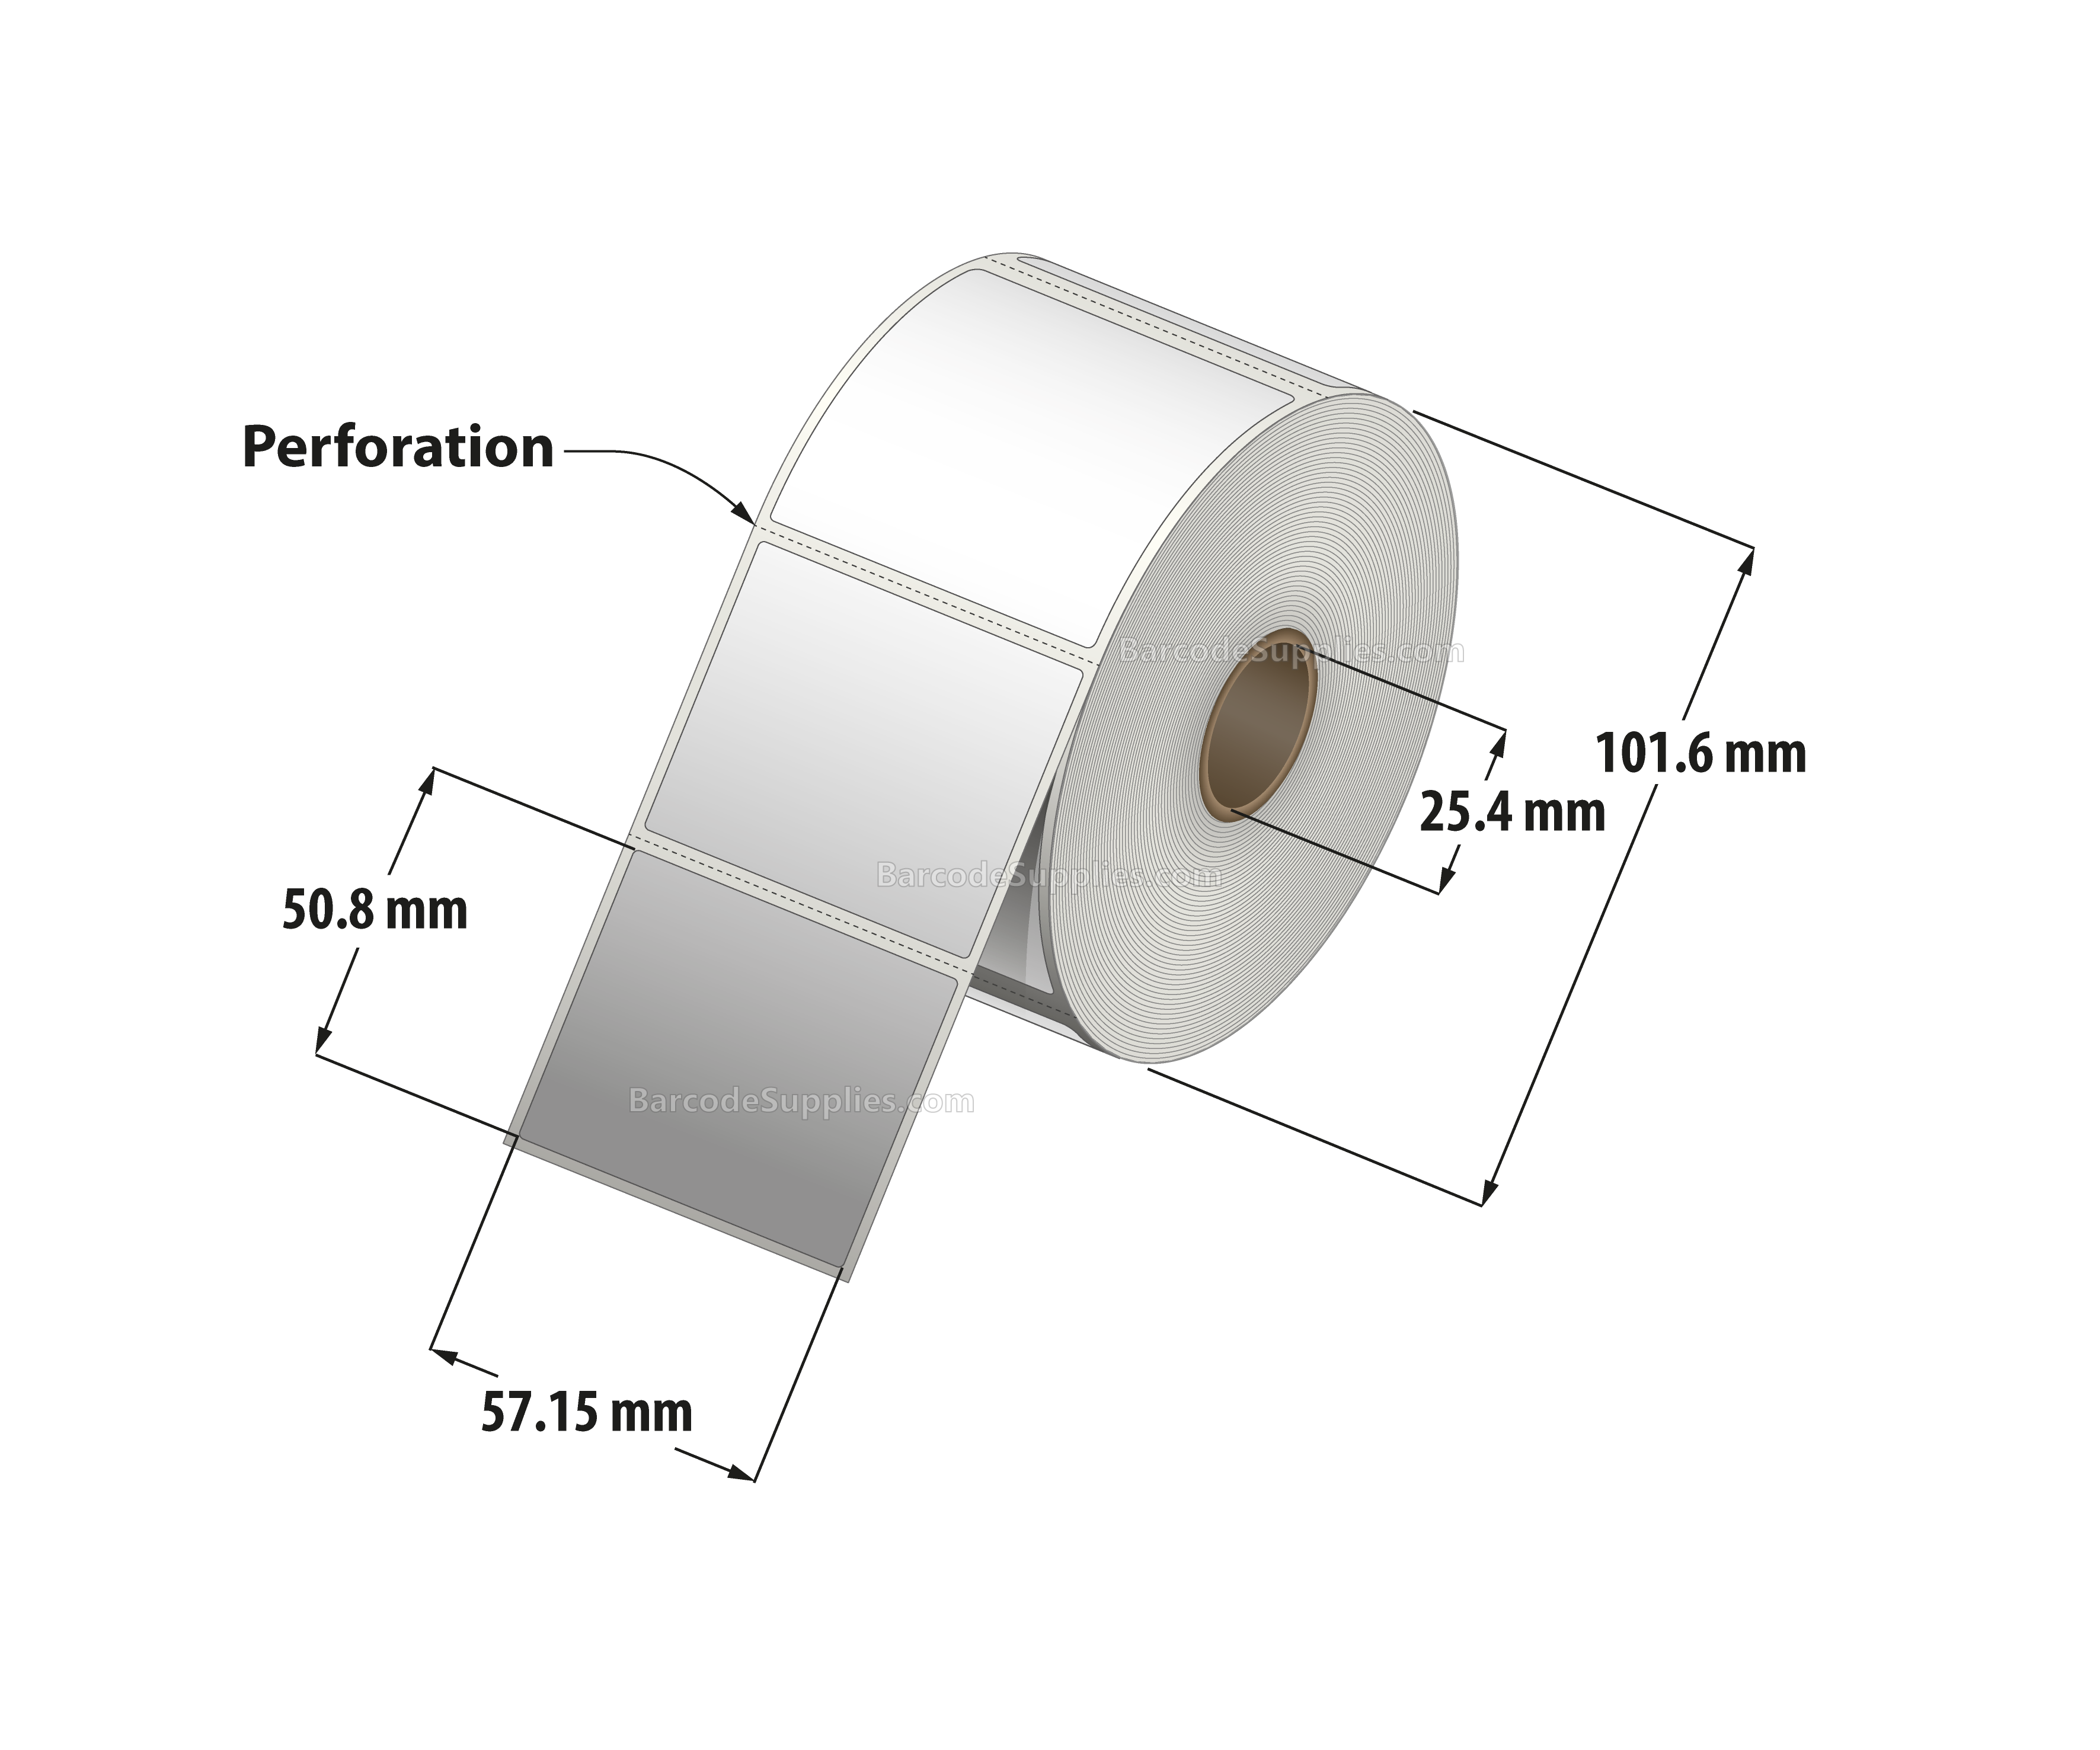 2.25 x 2 Direct Thermal White Labels With Acrylic Adhesive - Perforated - 735 Labels Per Roll - Carton Of 12 Rolls - 8820 Labels Total - MPN: RD-225-2-735-1 - BarcodeSource, Inc.